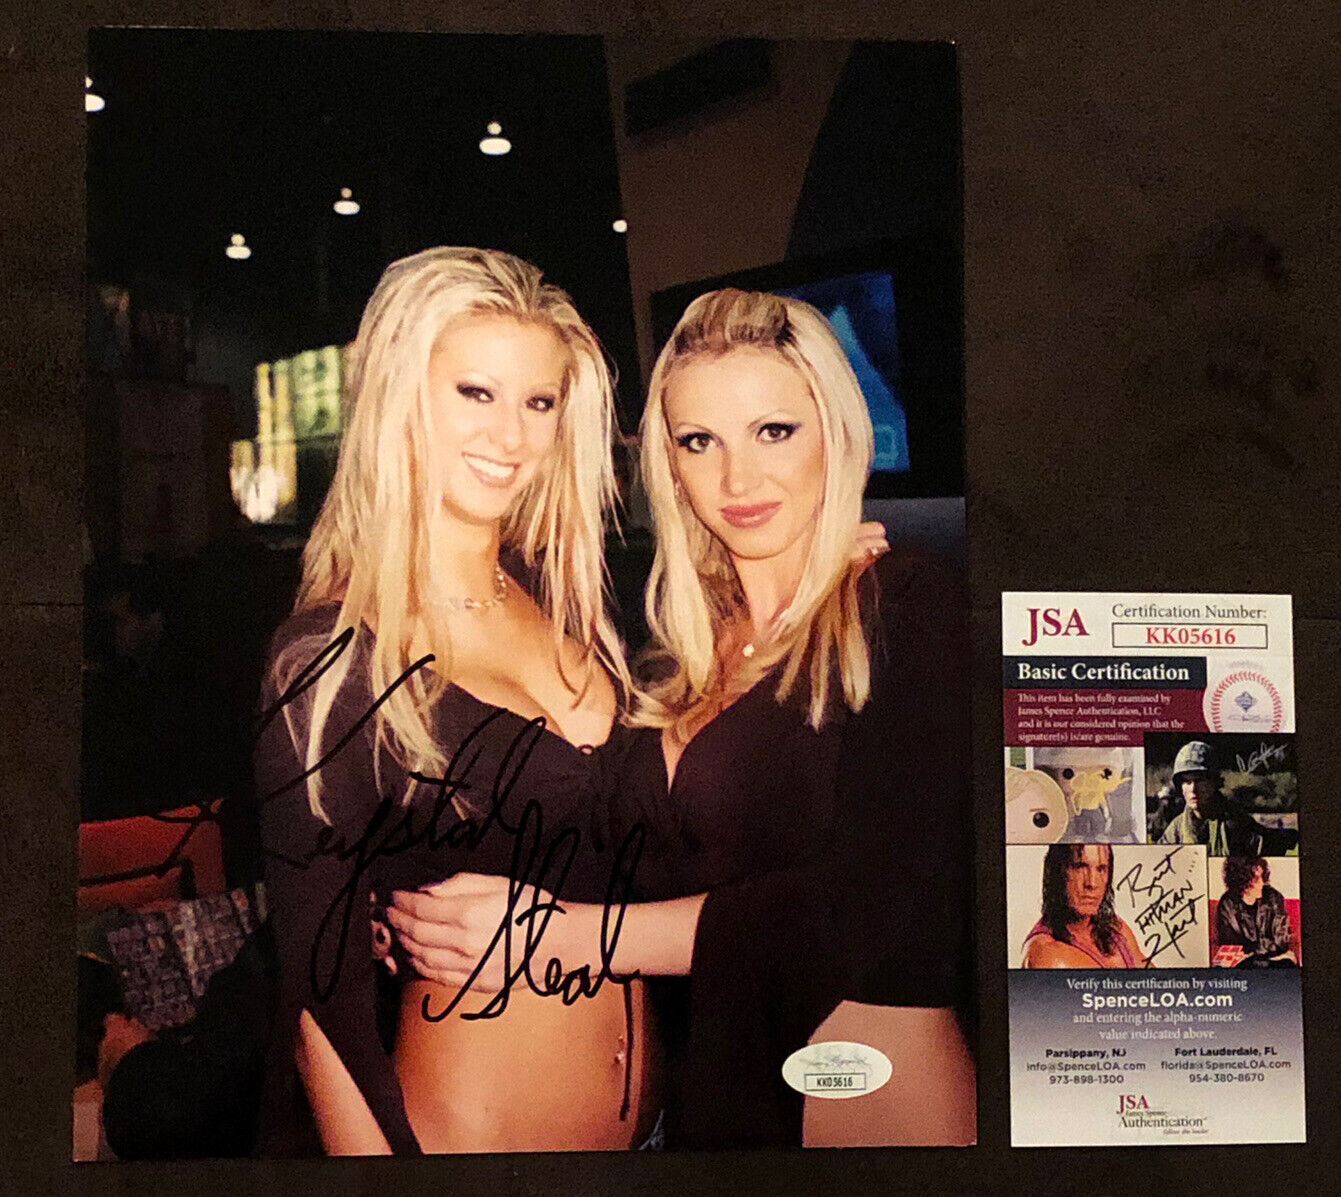 Krystal Steal Signed 8x10 Photo Poster painting ADULT STAR AUTOGRAPH Hustler Candid Rare JSA